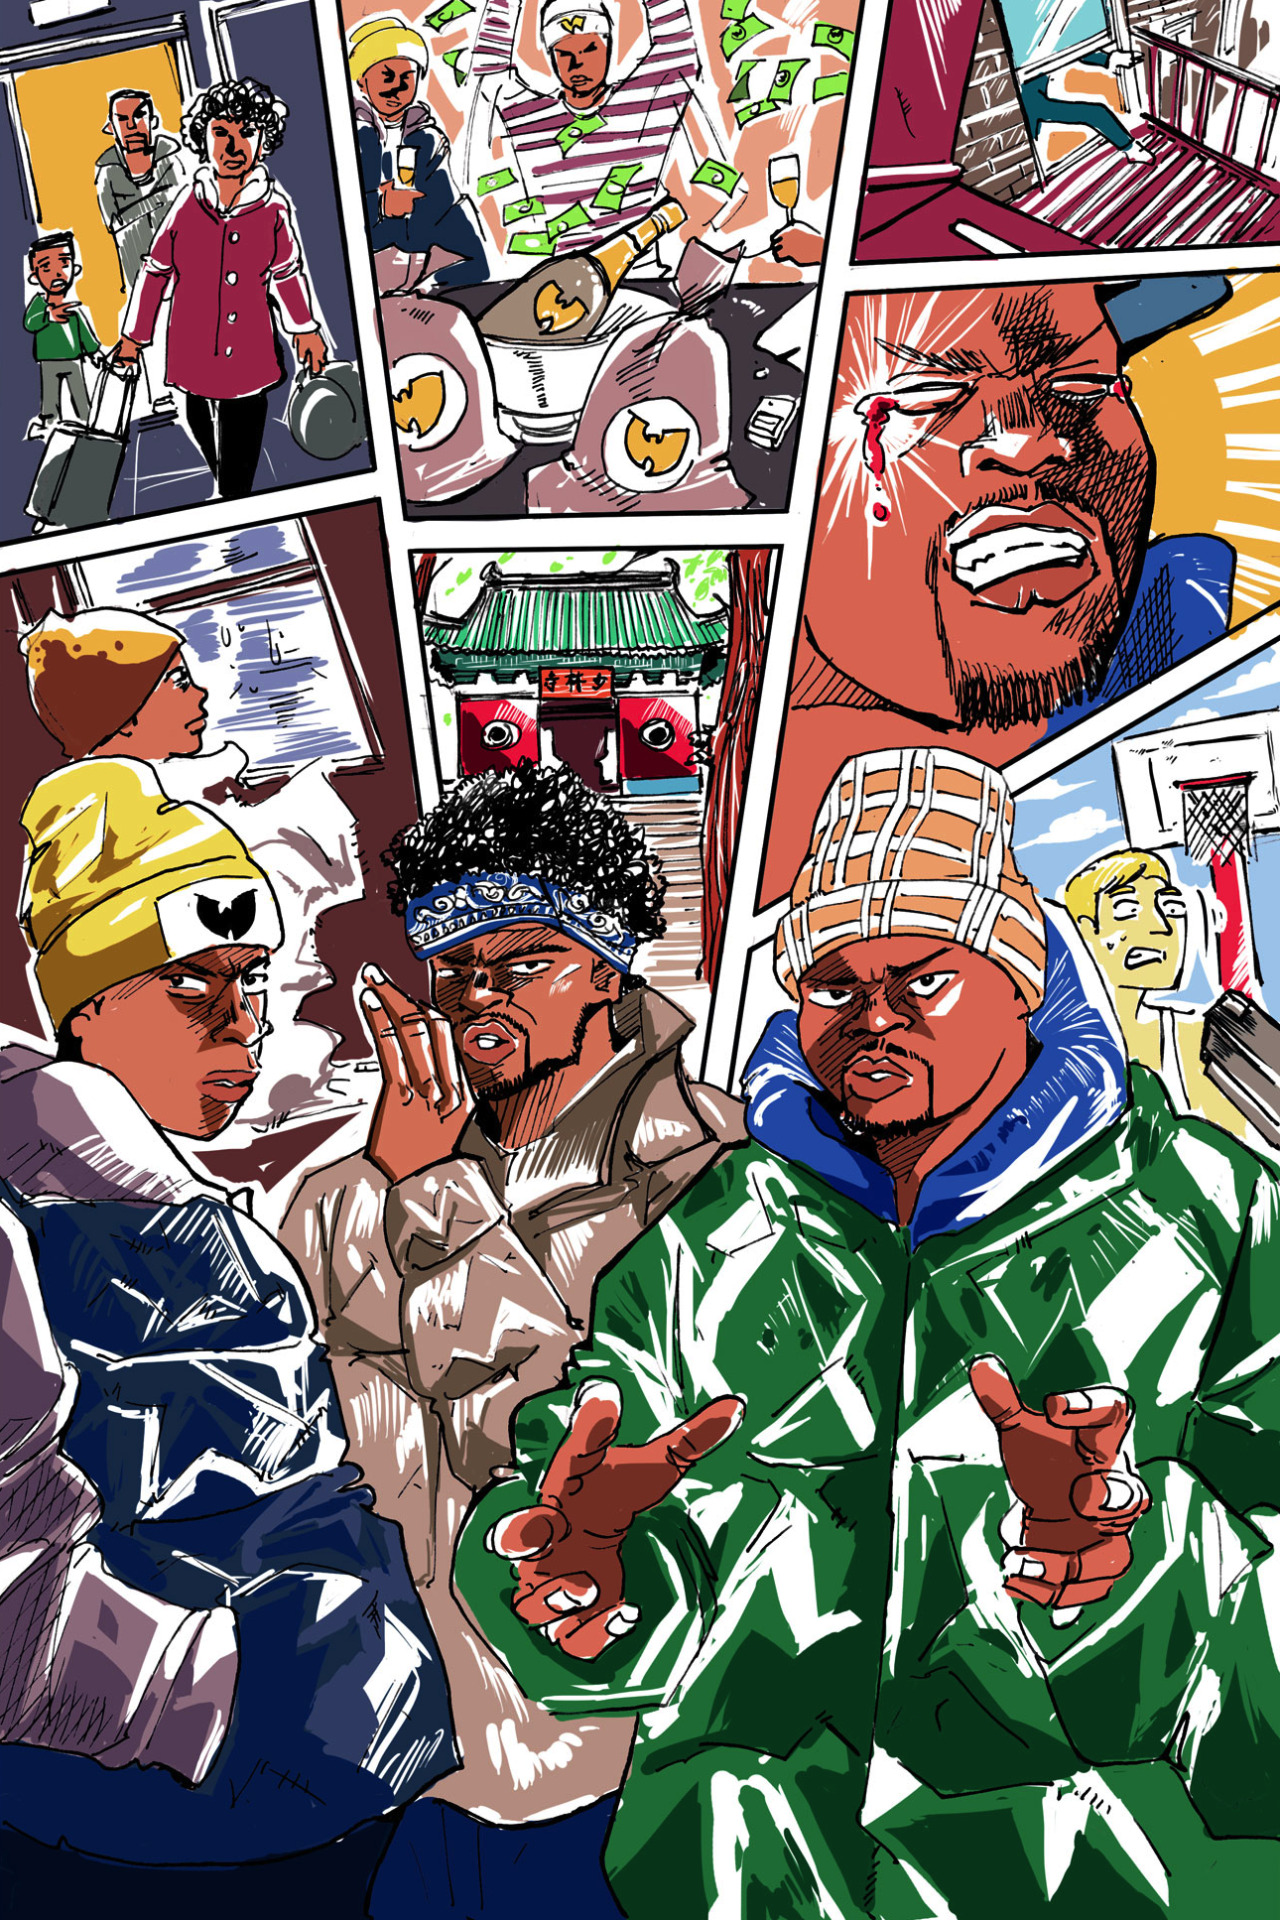 RE-ENTERING THE 36 CHAMBERS (via noiseymusic) Words by twitt // Illustrations by